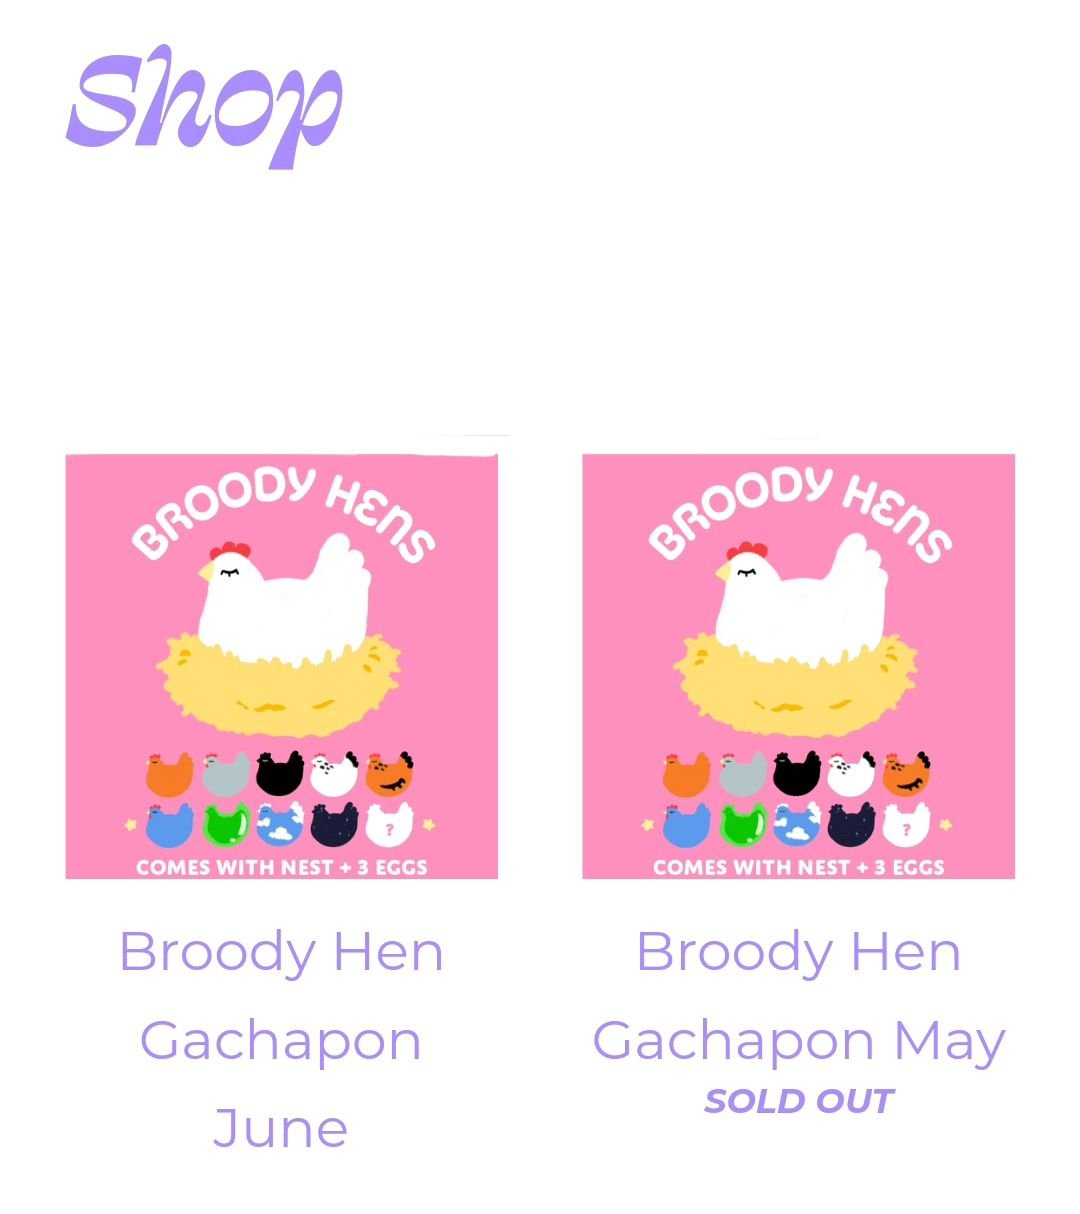 Gachapon slots are currently available! May has sold out, but June still has some spaces available! Get them while they're available:)

Also you may see the shop is quite empty! This month I'll be super busy, so the shop will be Gacha and one-off pie